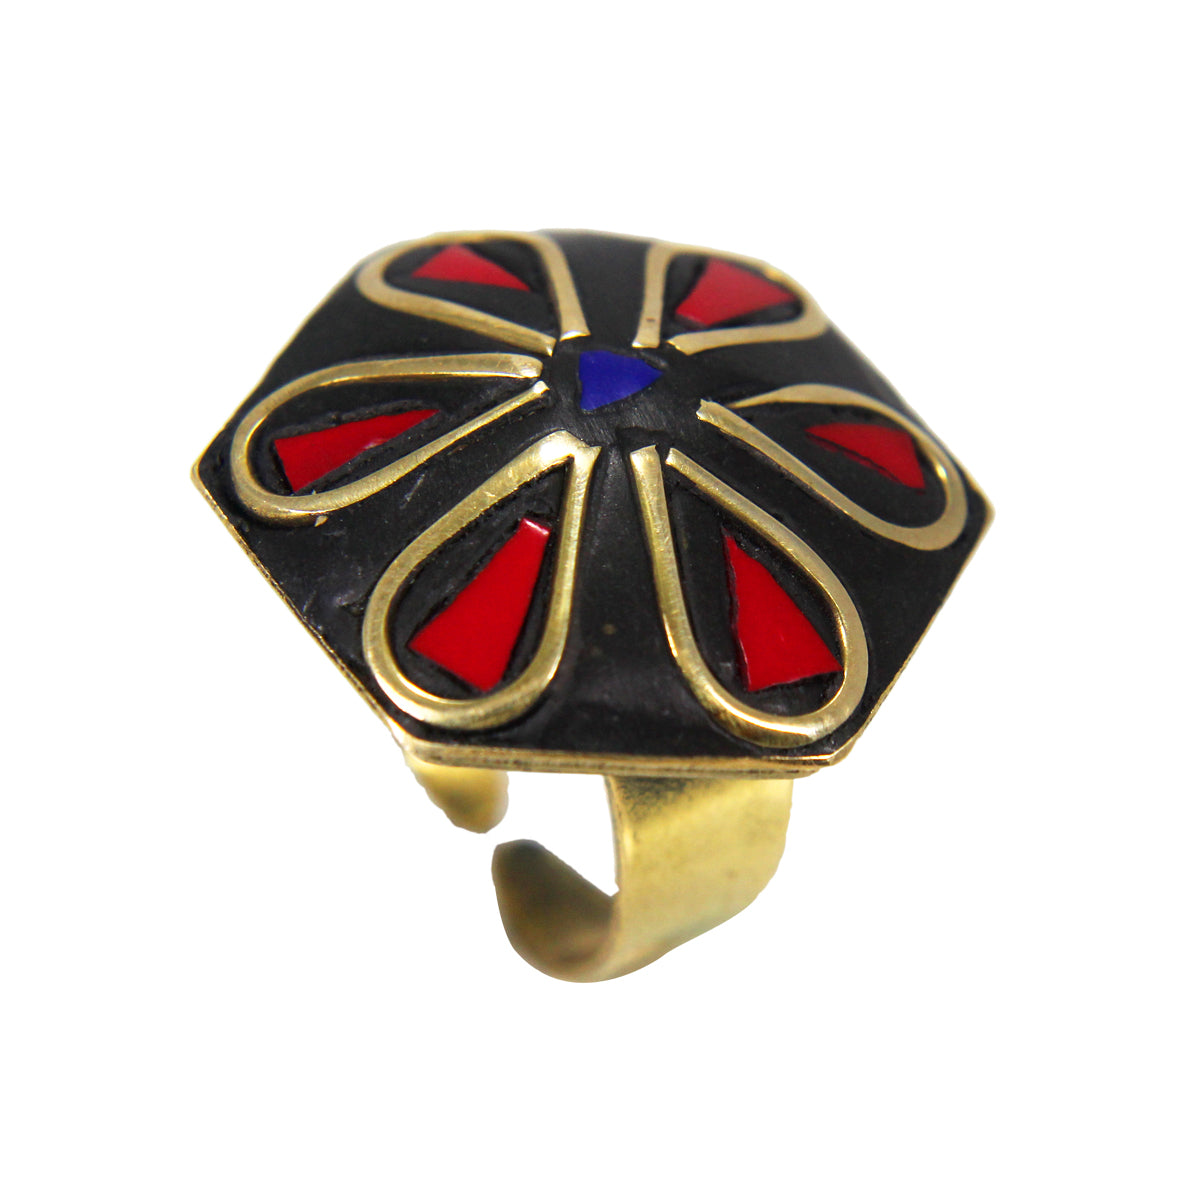  Latest Bohemian Black Golden Design Ring with Red Stone